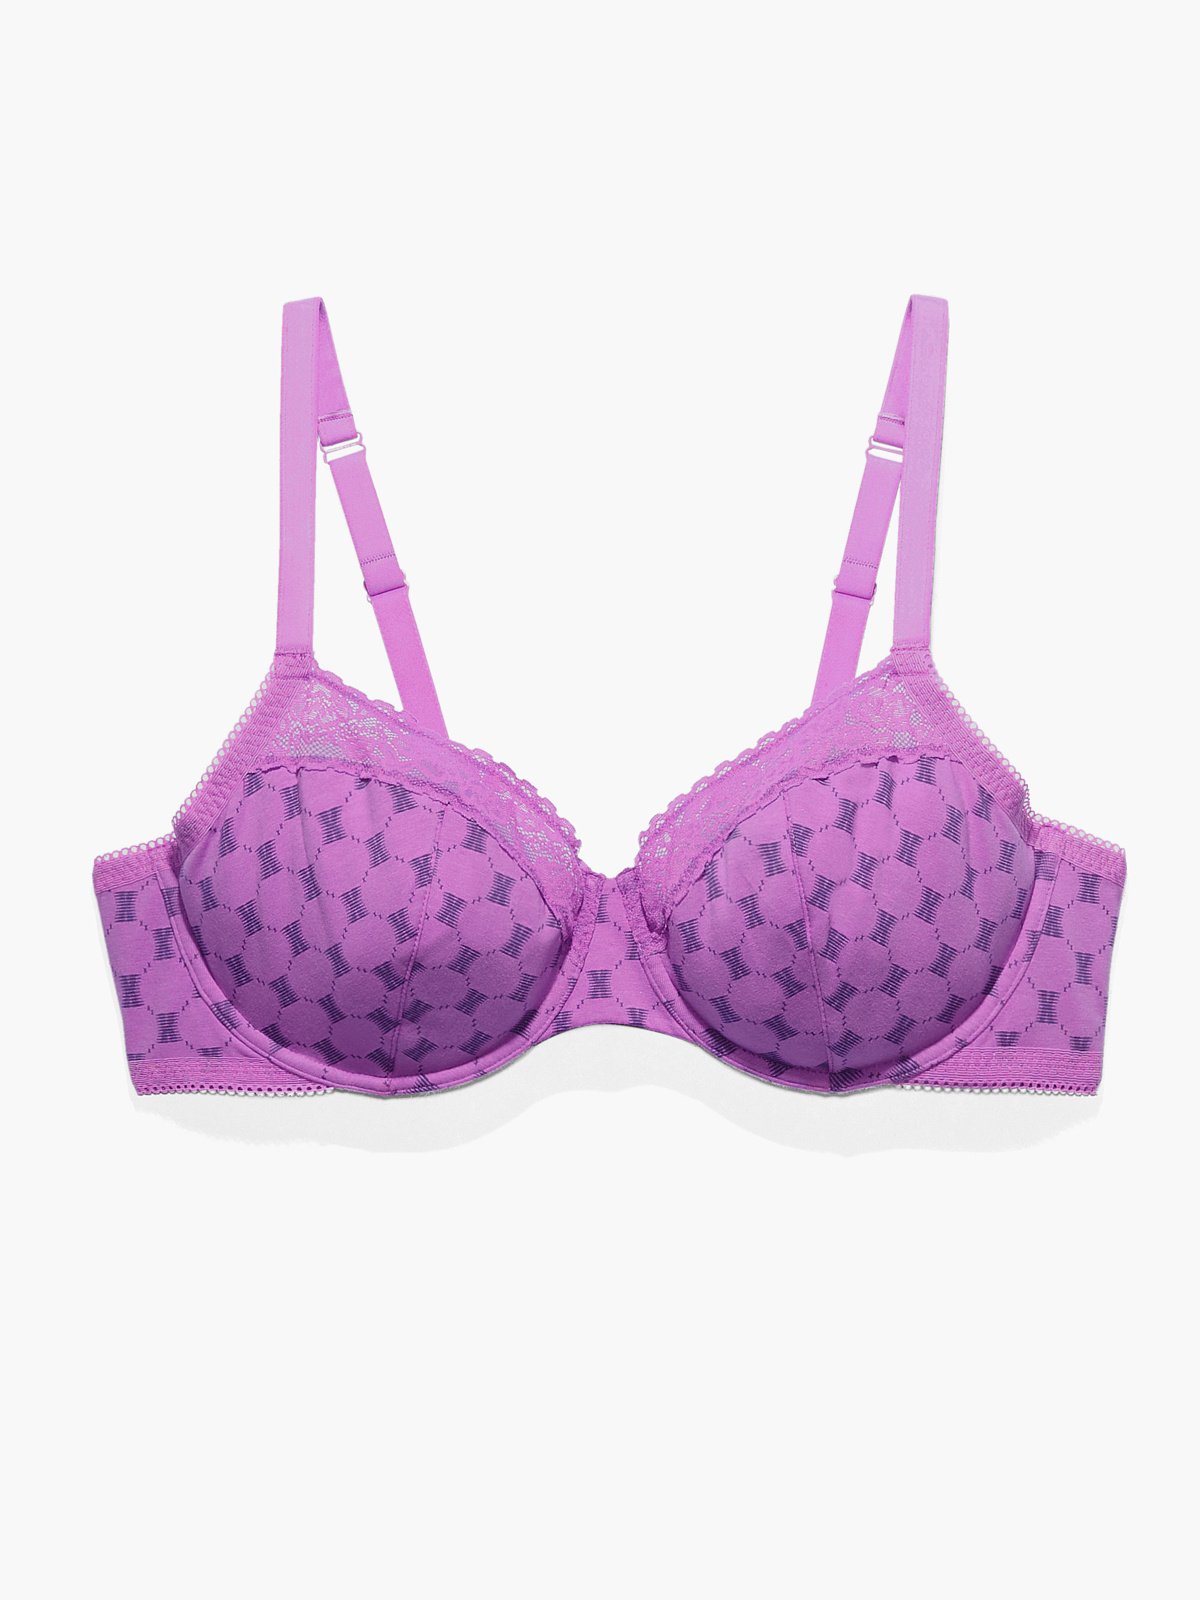 Fifth Sense - Suggestive Bra 75A - SOLD OUT